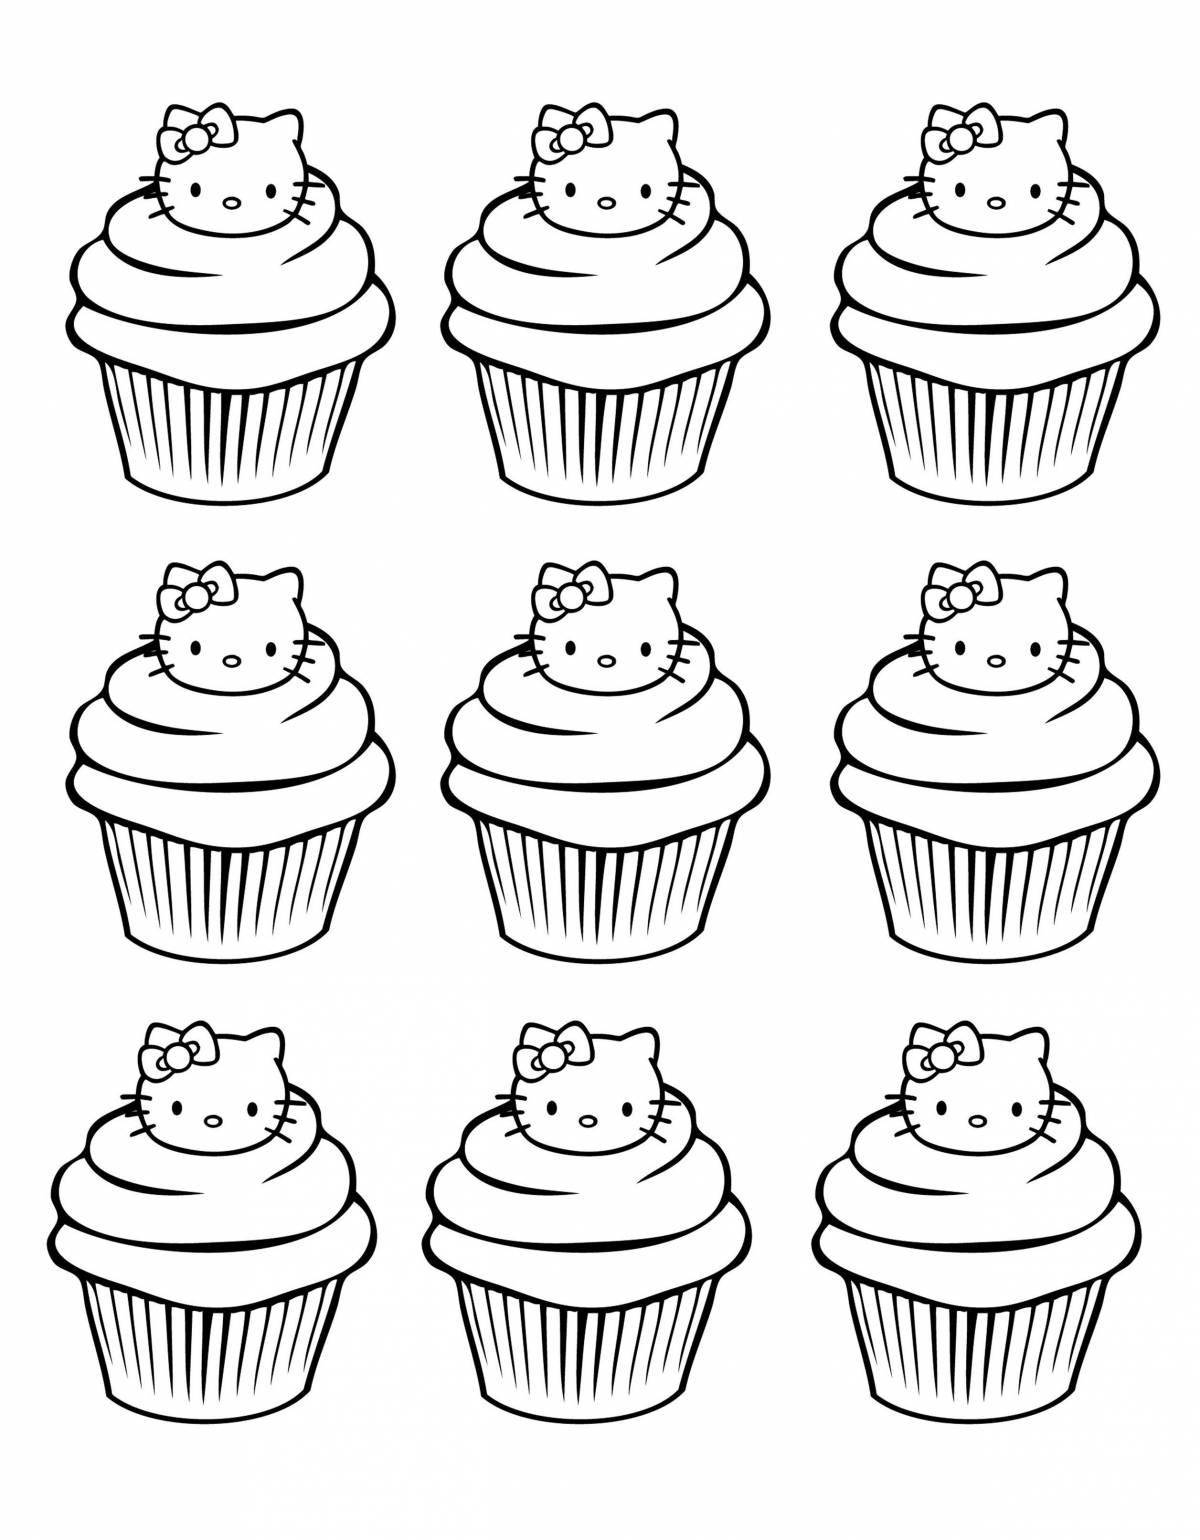 Splendid coloring page black and white small